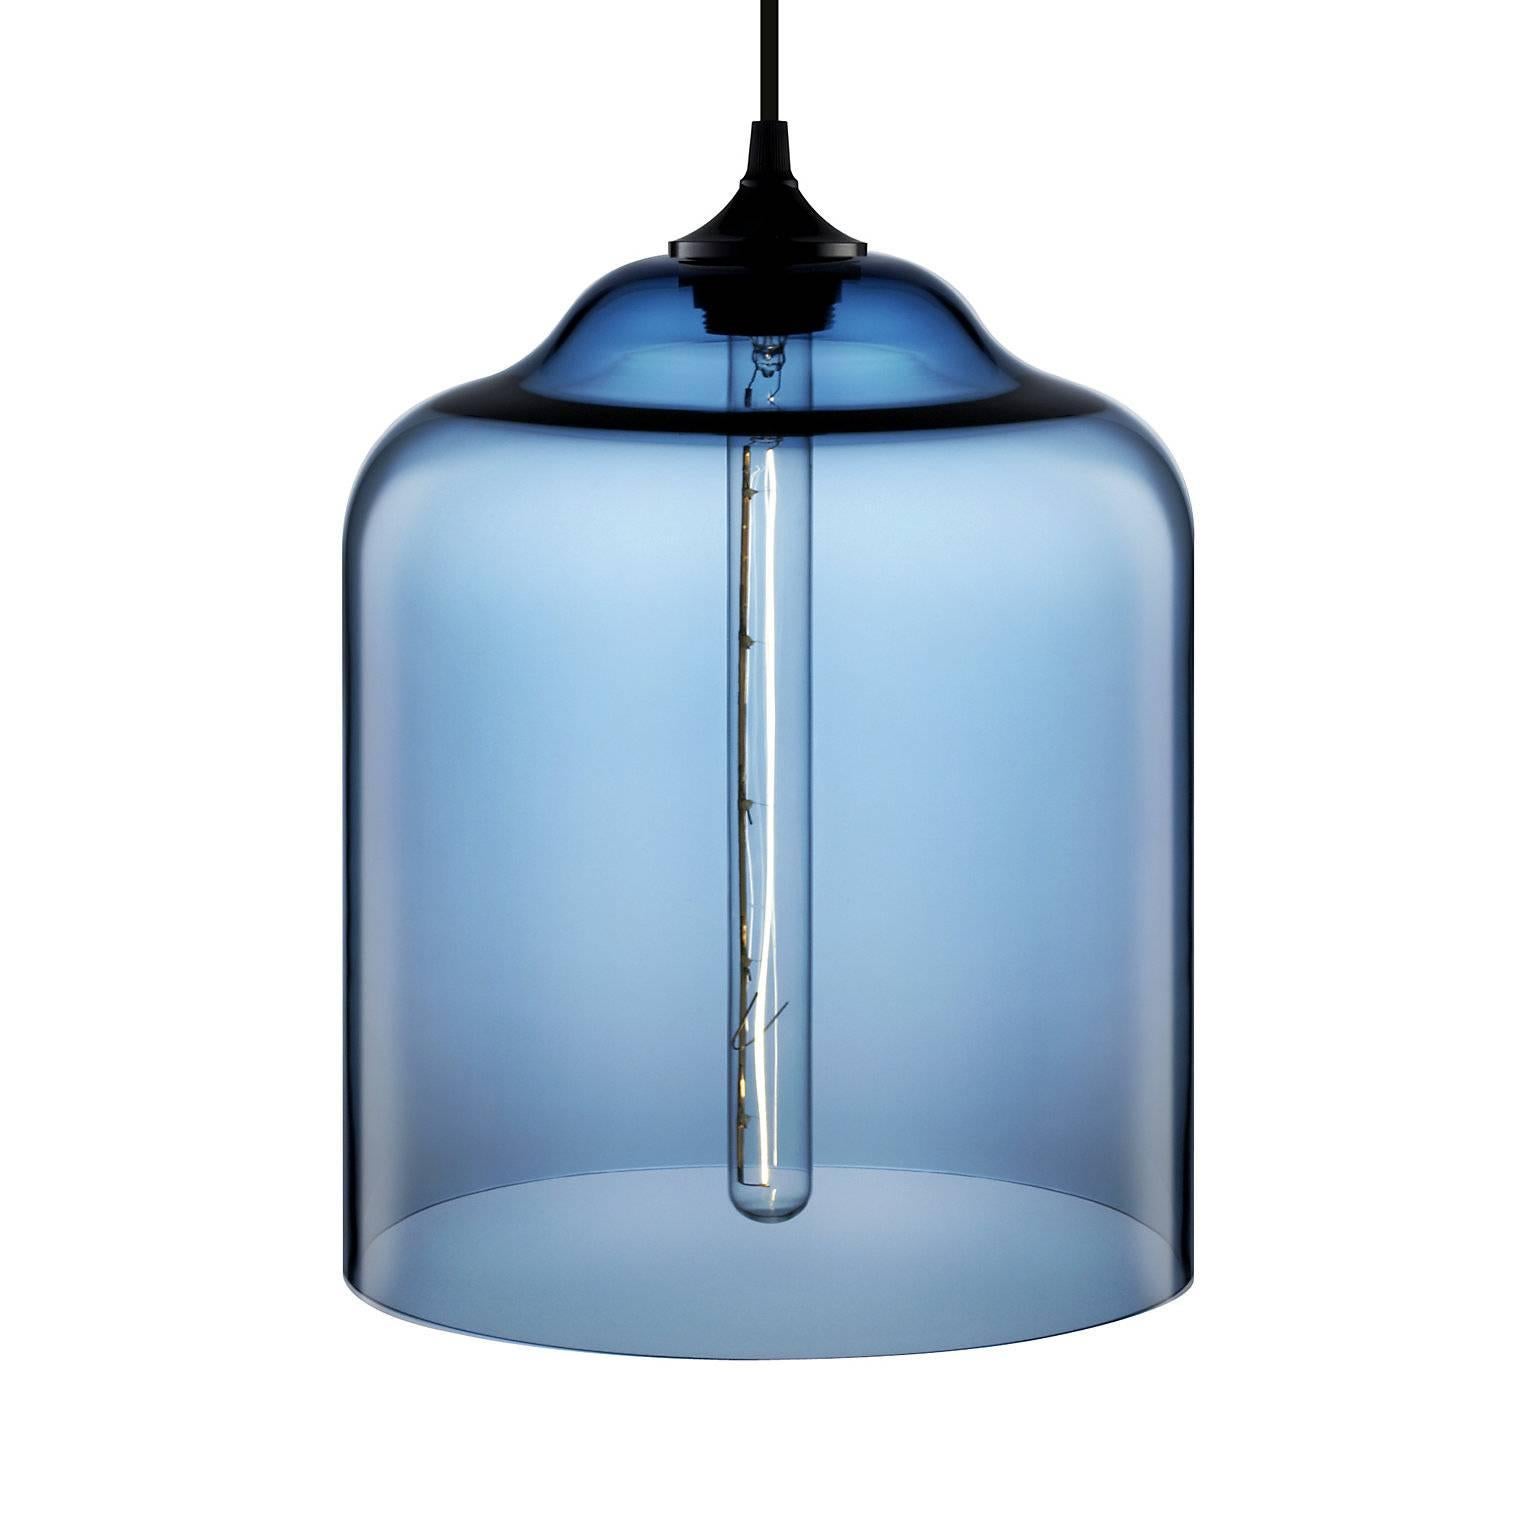 American Bell Jar Amber Handblown Modern Glass Pendant Light, Made in the USA For Sale